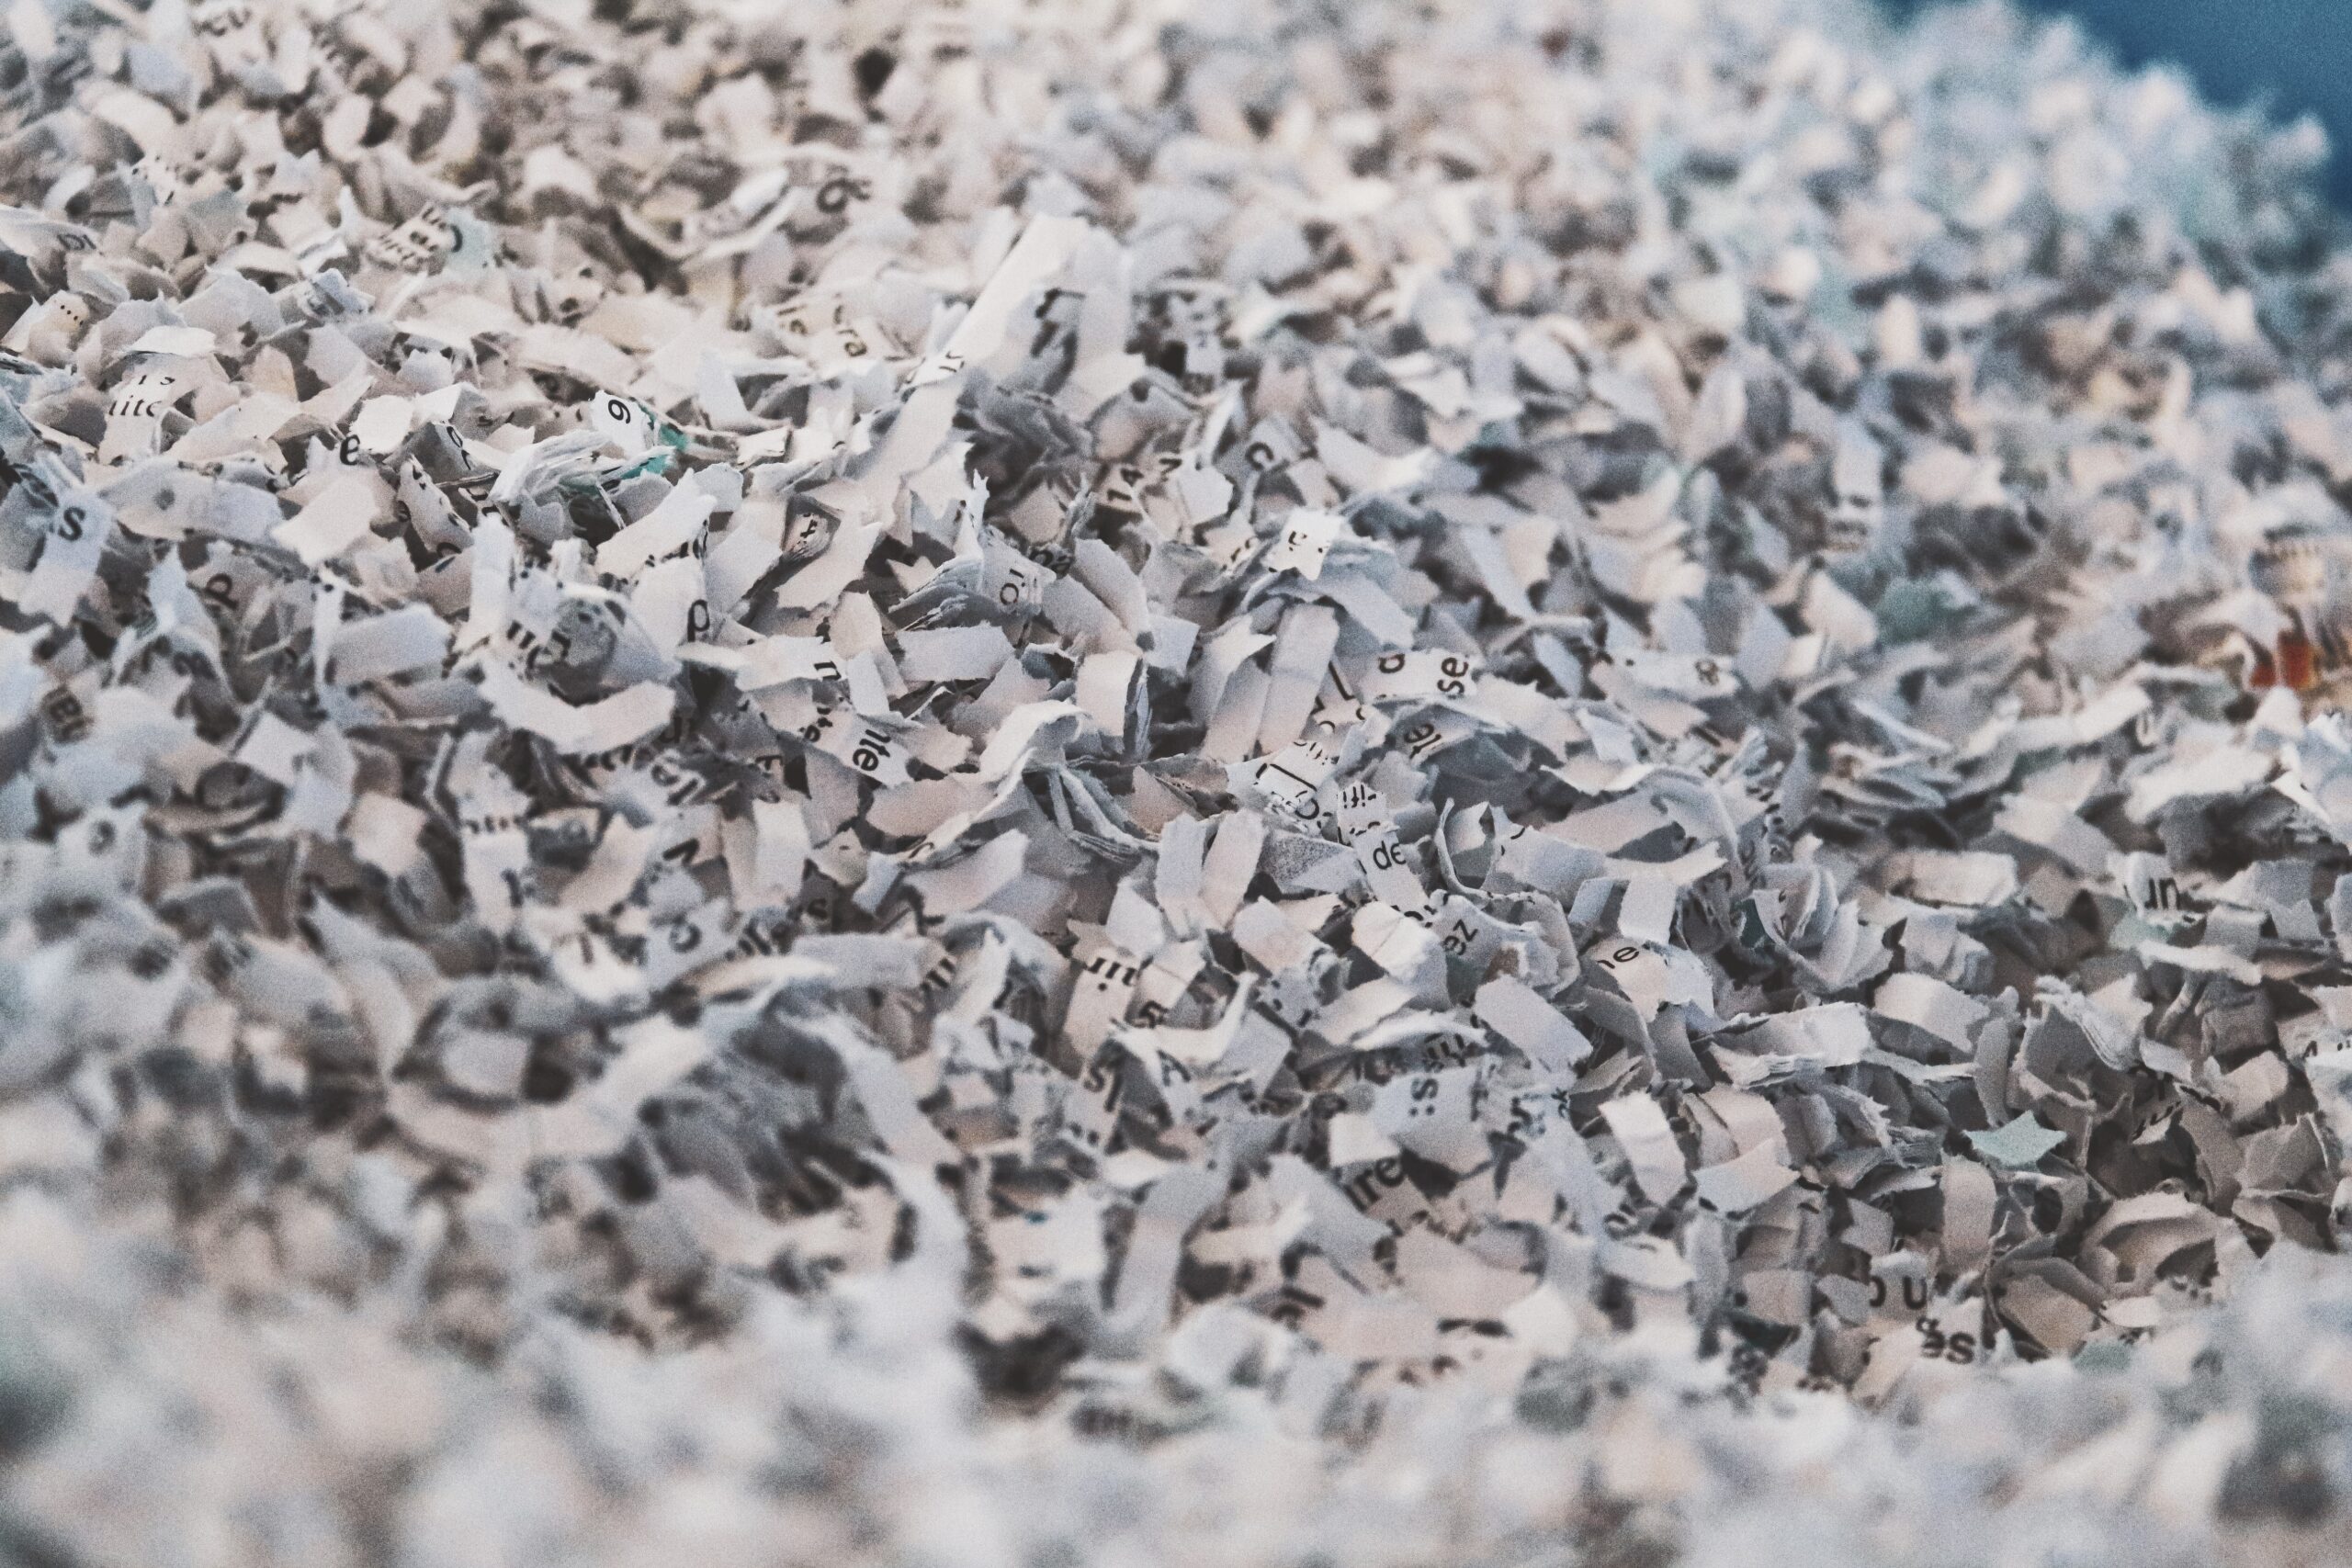 Close up of a shredded pile of paper